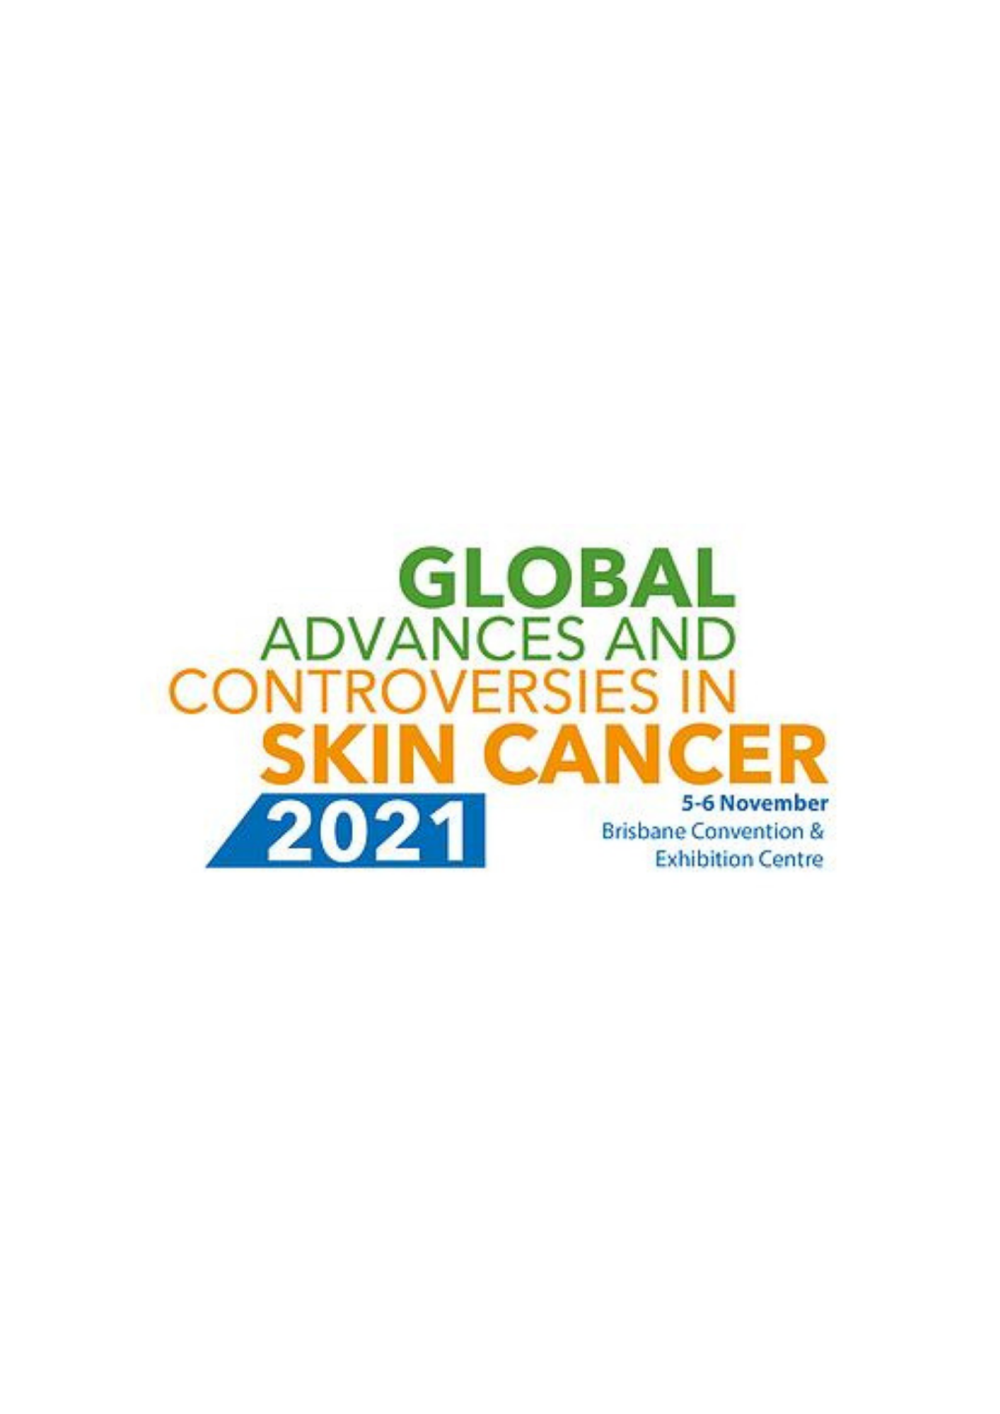 Global Advances and Controversies in Skin Cancer 2021